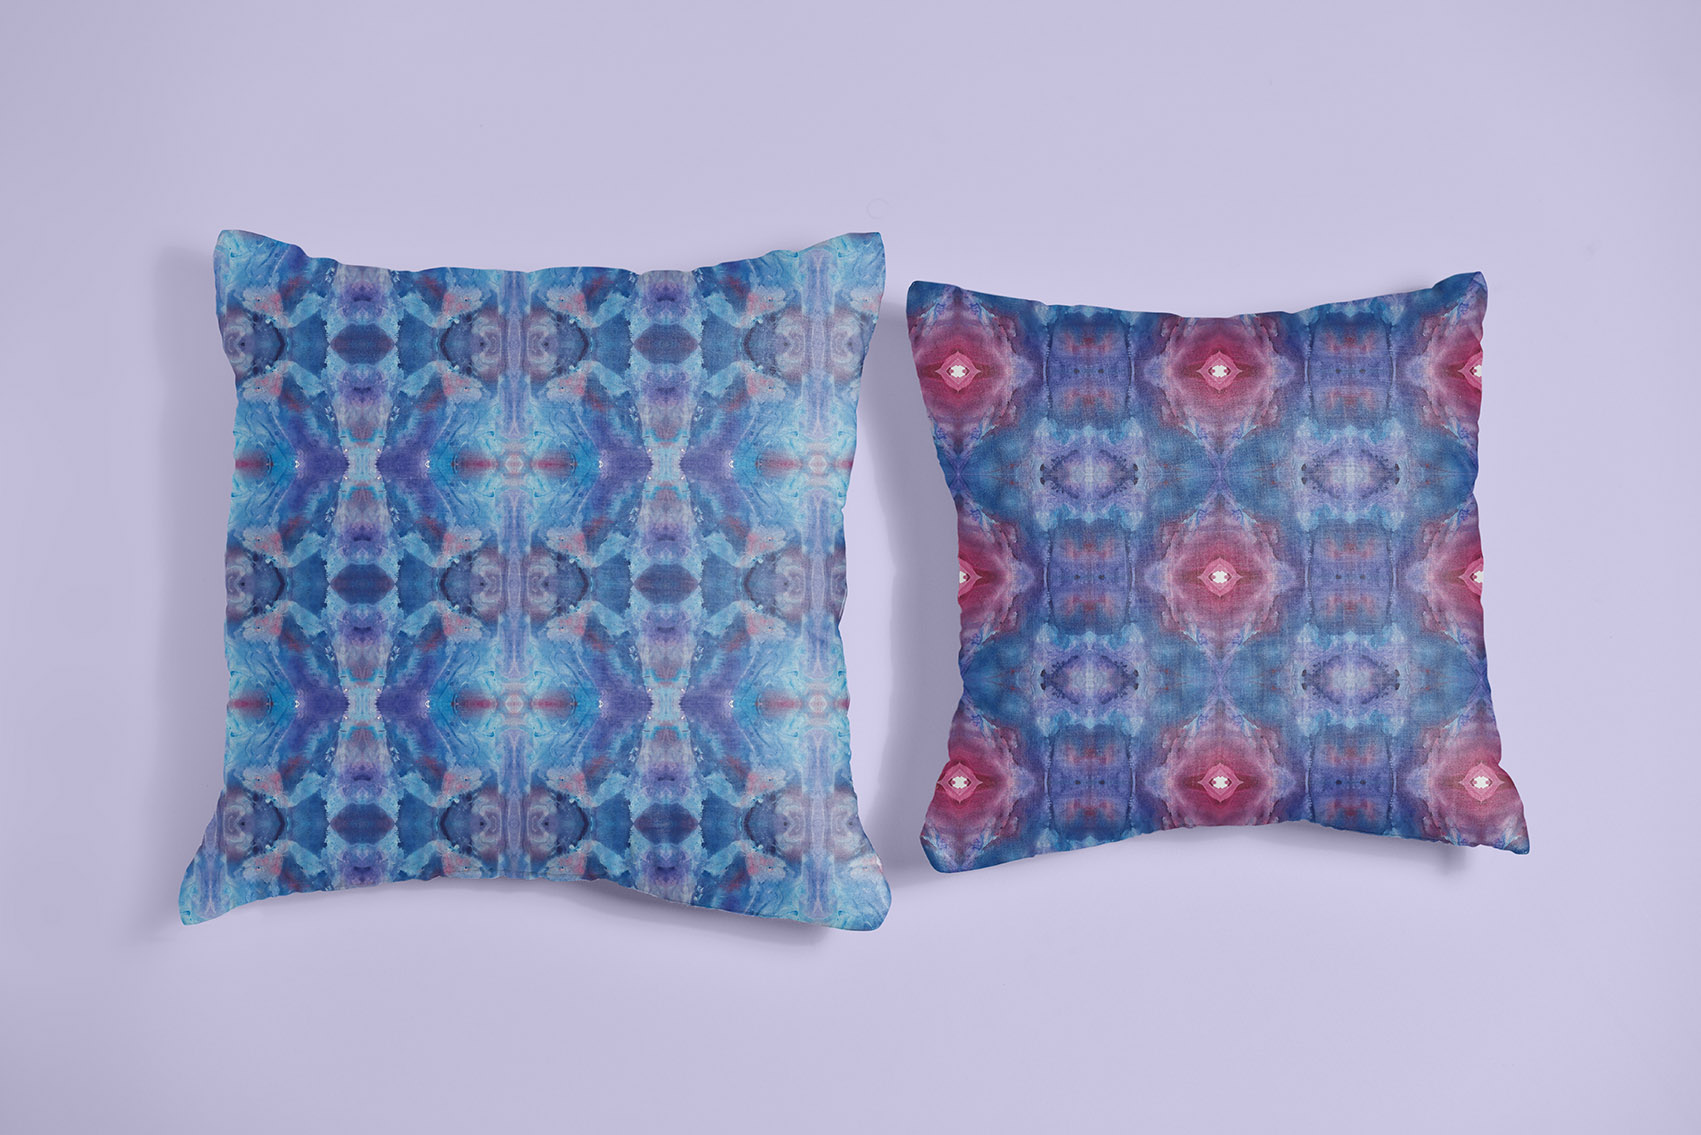 Abstract Watercolor Fractal Pattern pillows.